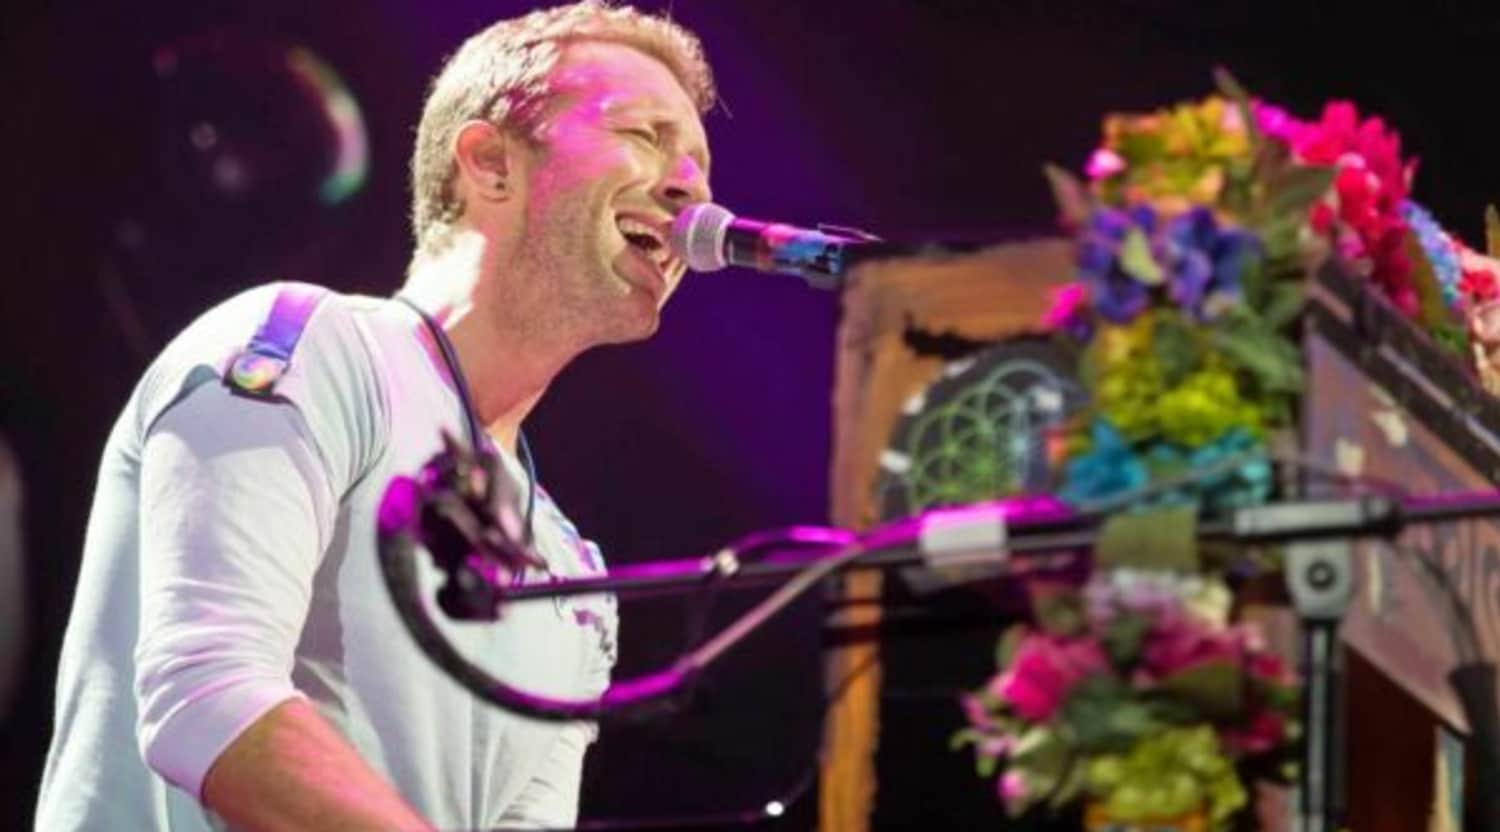 Coldplay Tickets - Coldplay Concert Tickets and Tour Dates - StubHub Canada